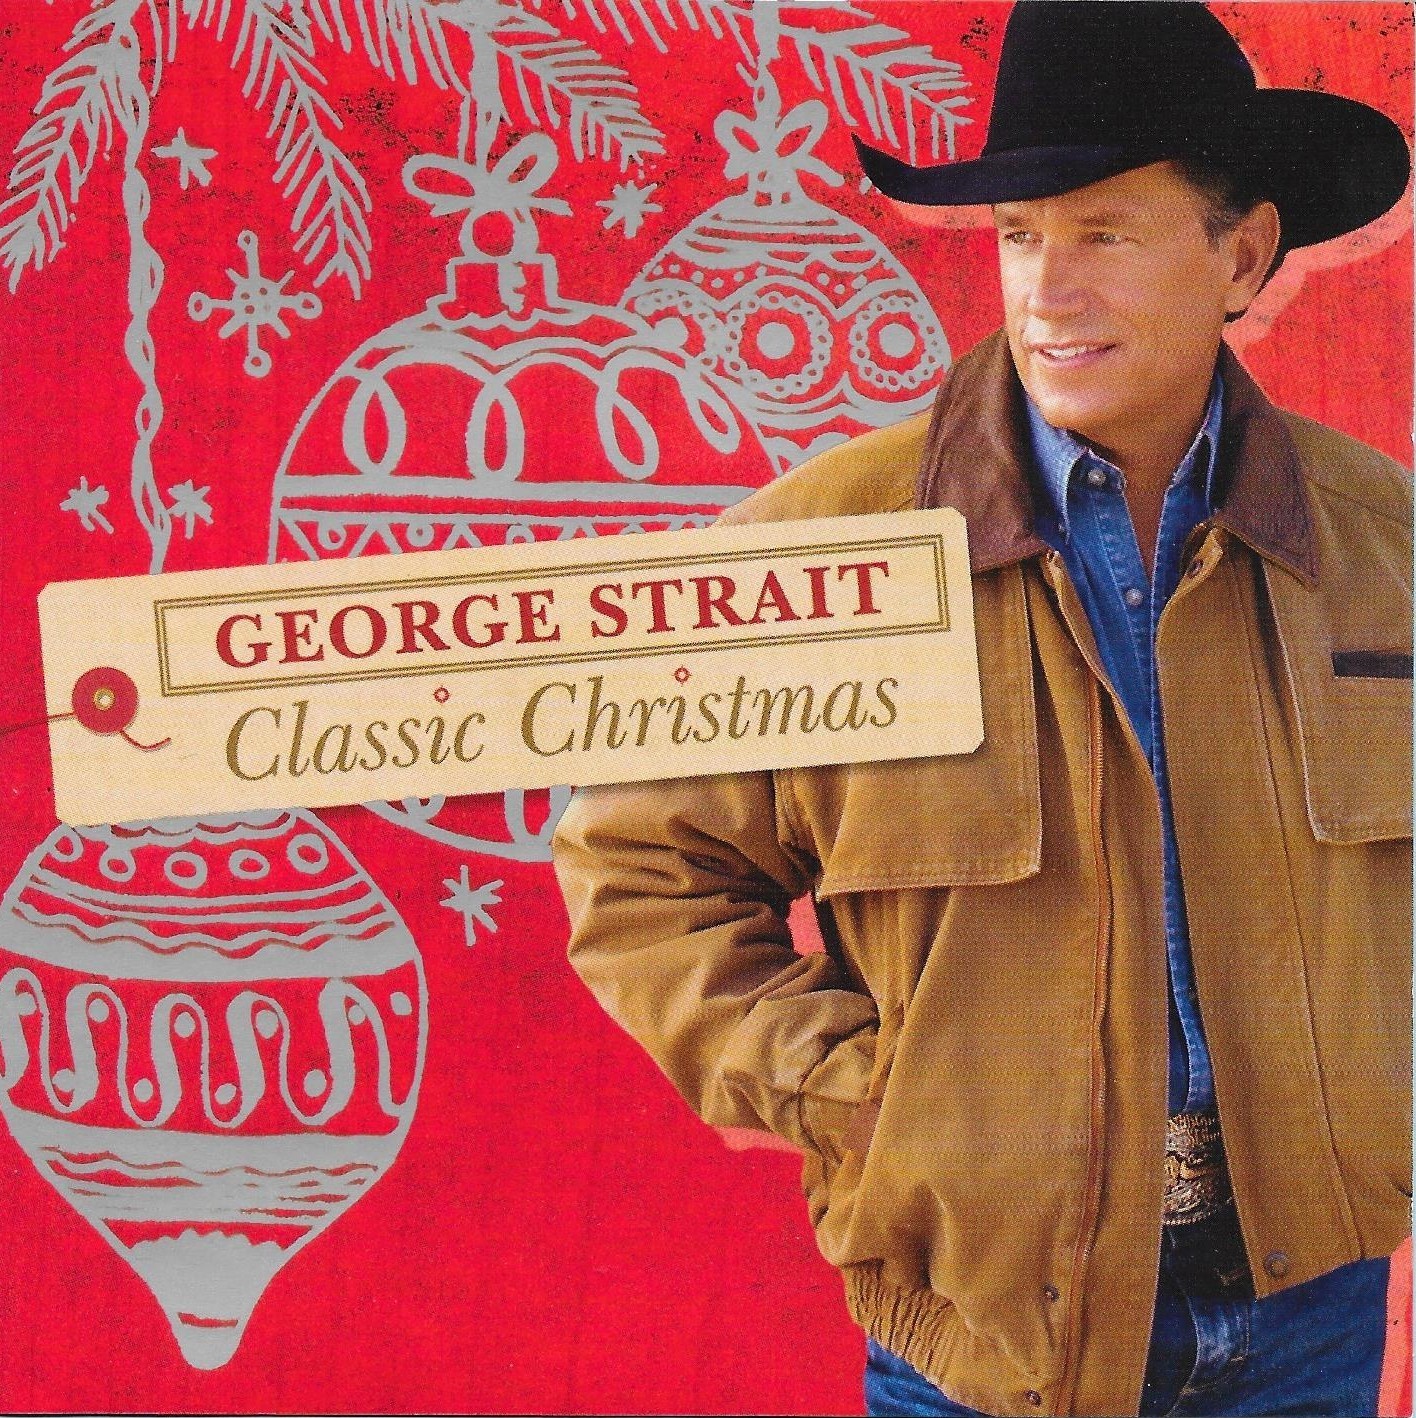 Art for Jingle Bells by George Strait